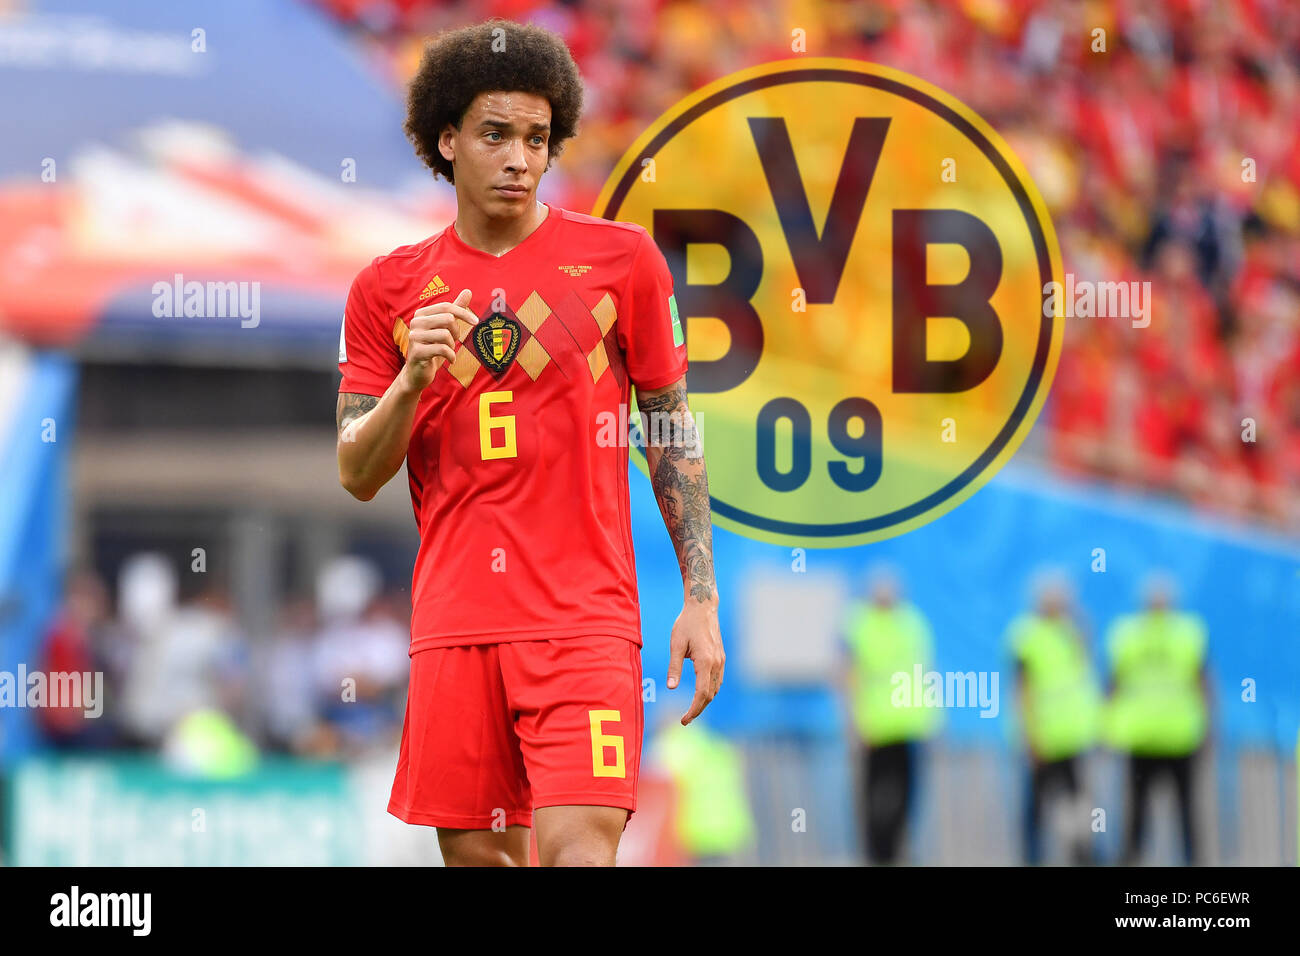 PHOTOMONTAGE. The commitment of Axel Witsel is still in the balance. Announcements, after which the Belgian national player already today, Monday, for medical check up in Dortmund, were apparently frozen. BVB continues to fight for the center. The alleged exit clause could be the sticking point. No.1 archive photo: Axel WITSEL (BEL), skeptical, gesture, action, single image, single cut motive, half figure, half figure. Belgium (BEL) - Panama (PAN) 3-0, Preliminary Round, Group G, Game 13, on 18.06.2018 in SOCHI, Fisht Olymipic Stadium. Football World Cup 2018 in Russia from 14.06. - 15.07.2018 Stock Photo